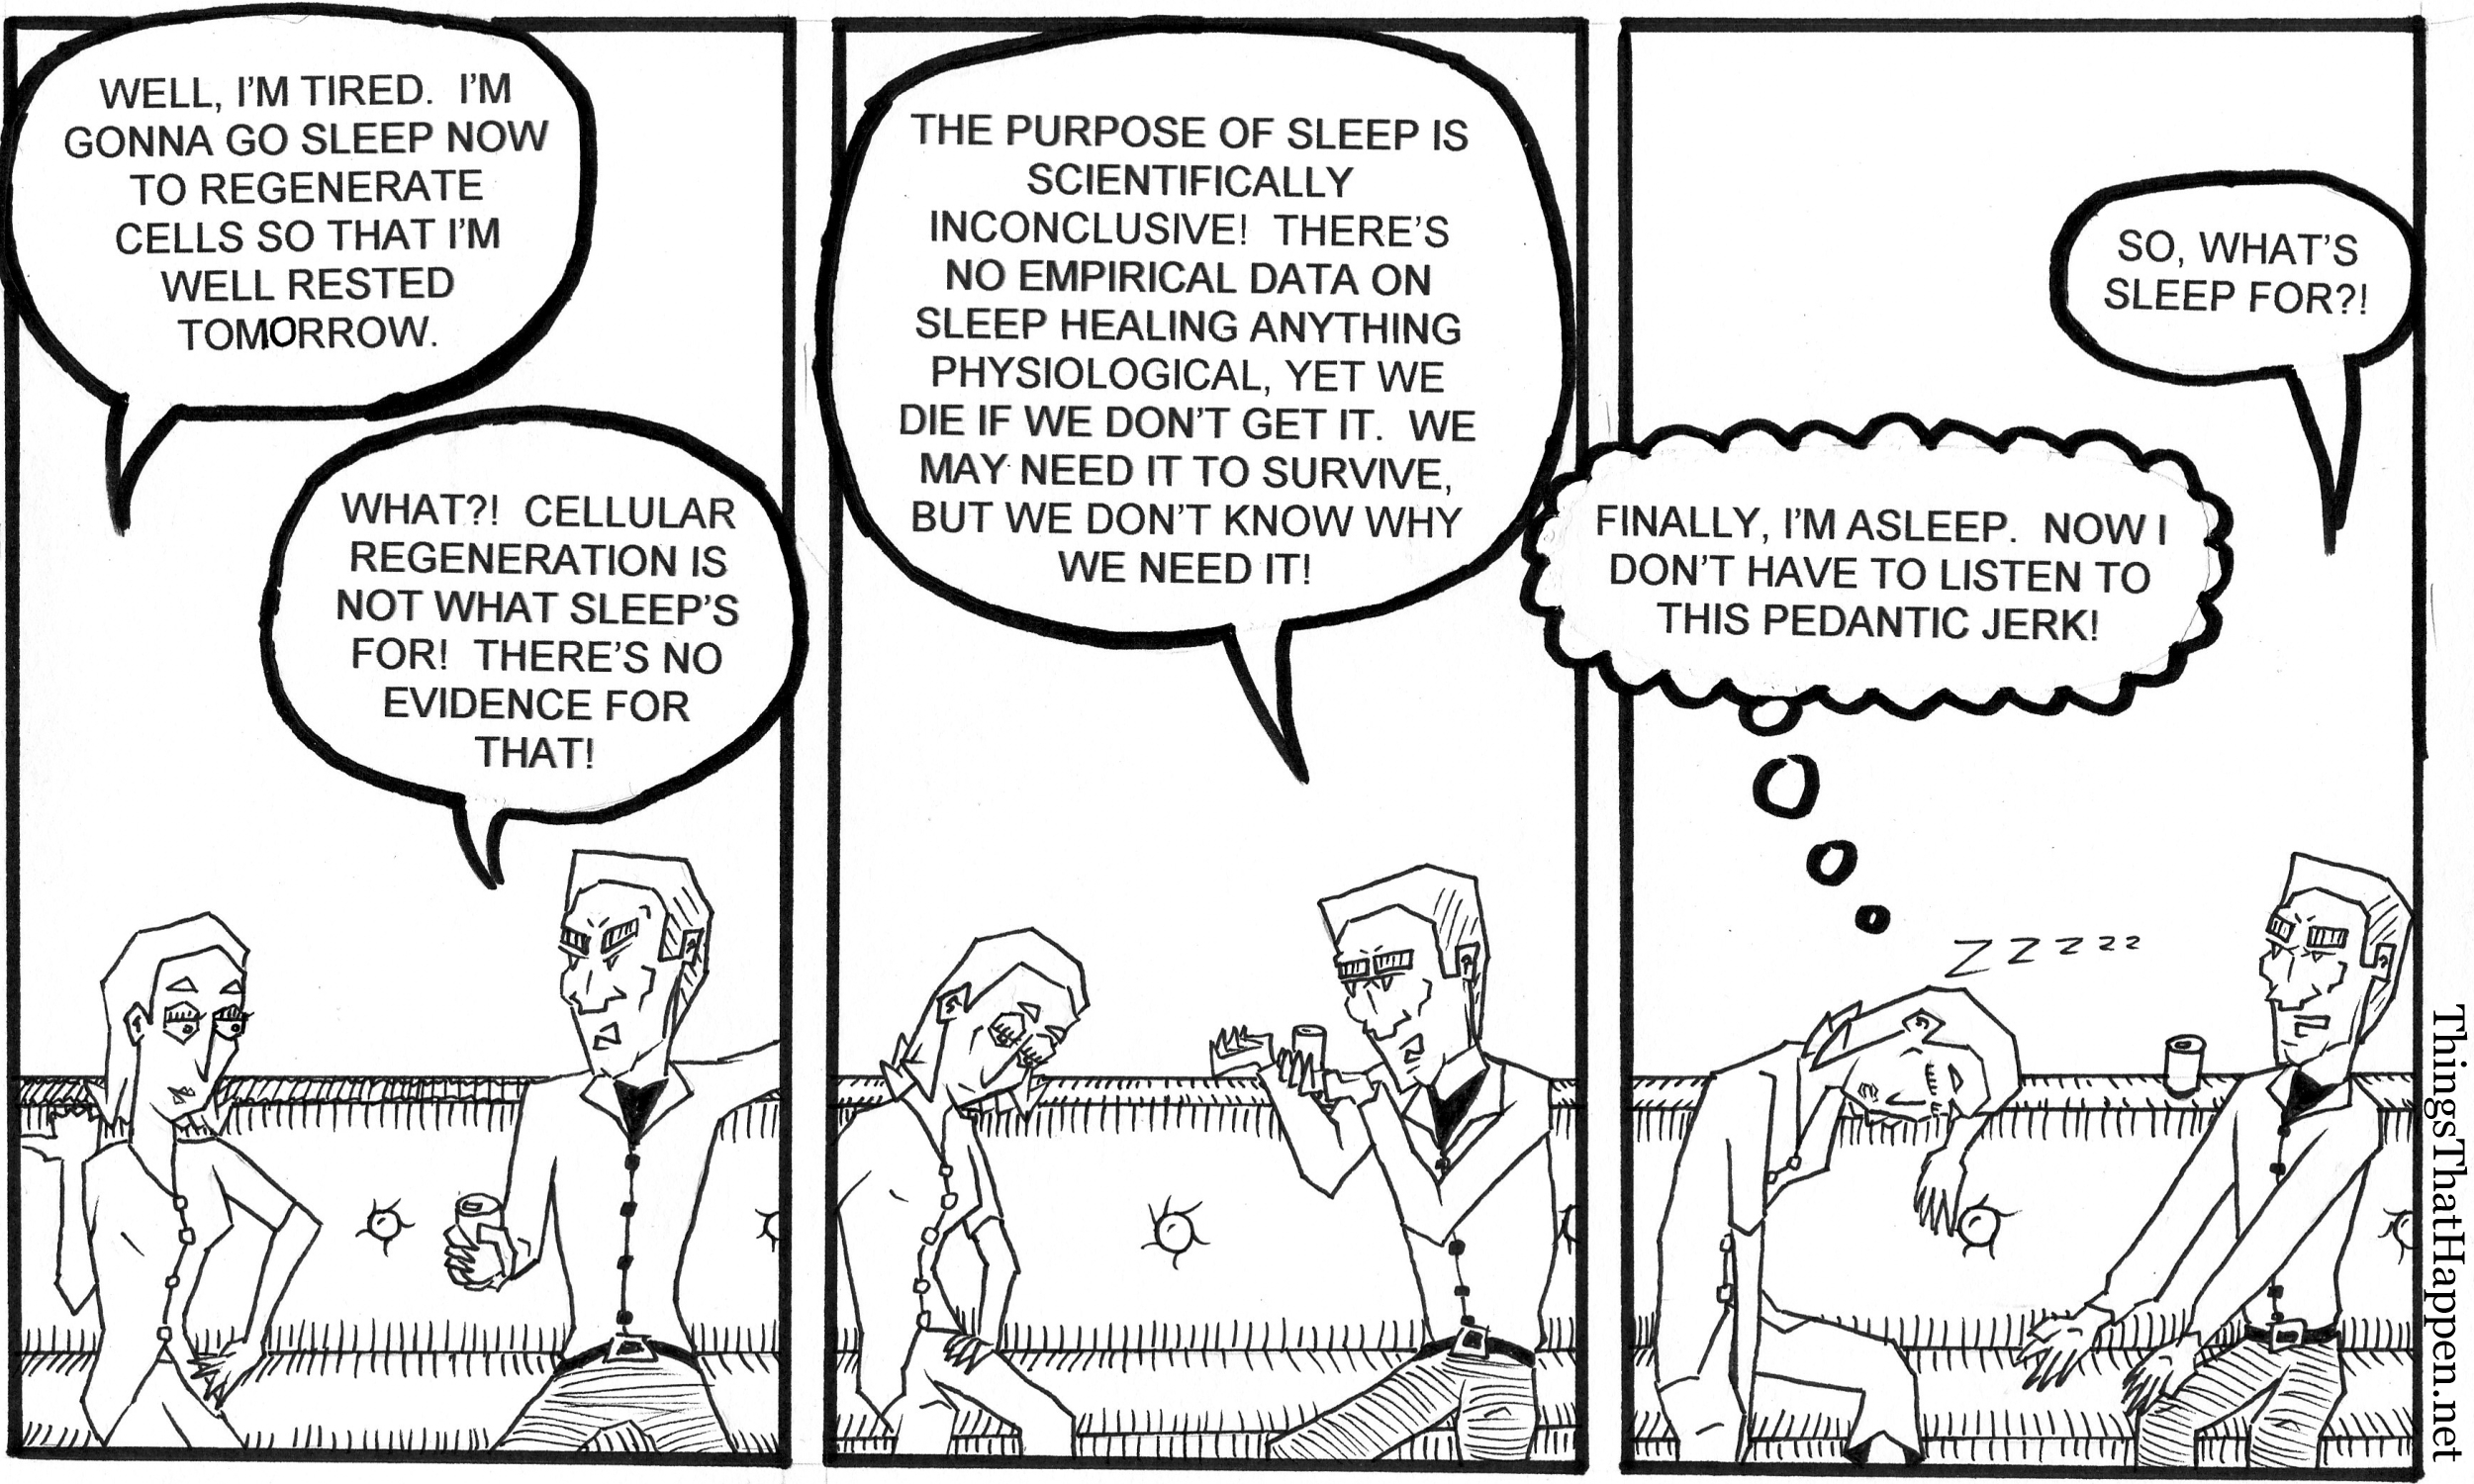 Yes, I'm aware we now know that sleep aids in cellular healing, among many, many other things.  I wrote this strip in like 2007 before it was really known